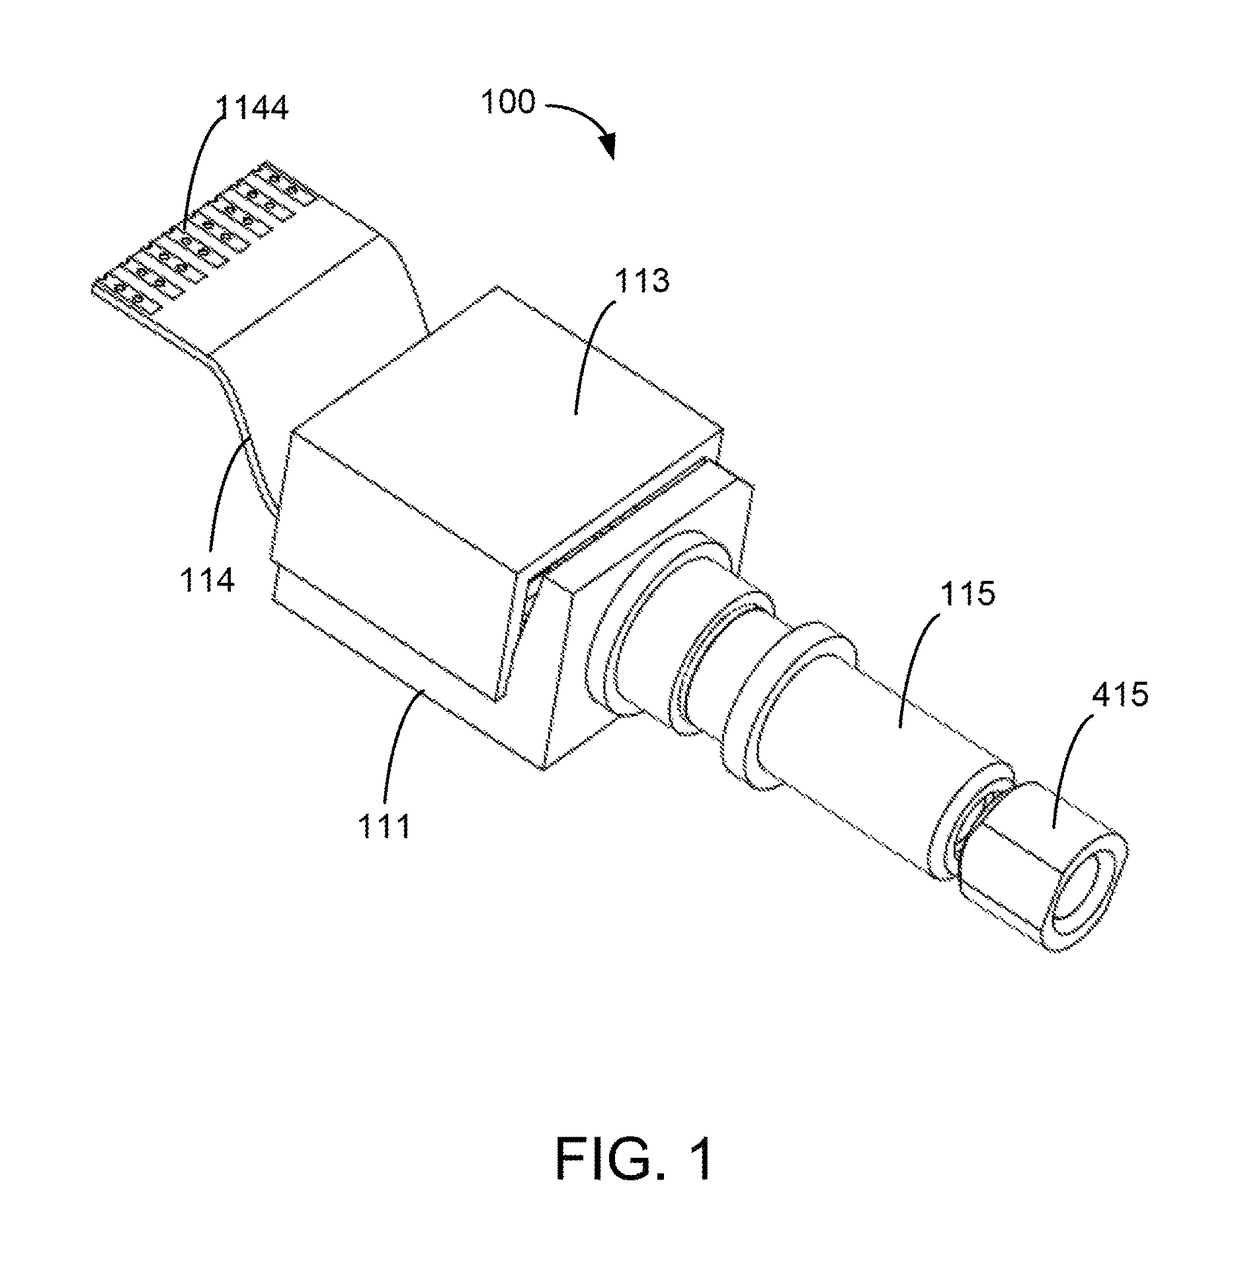 Small form factor transmitting device